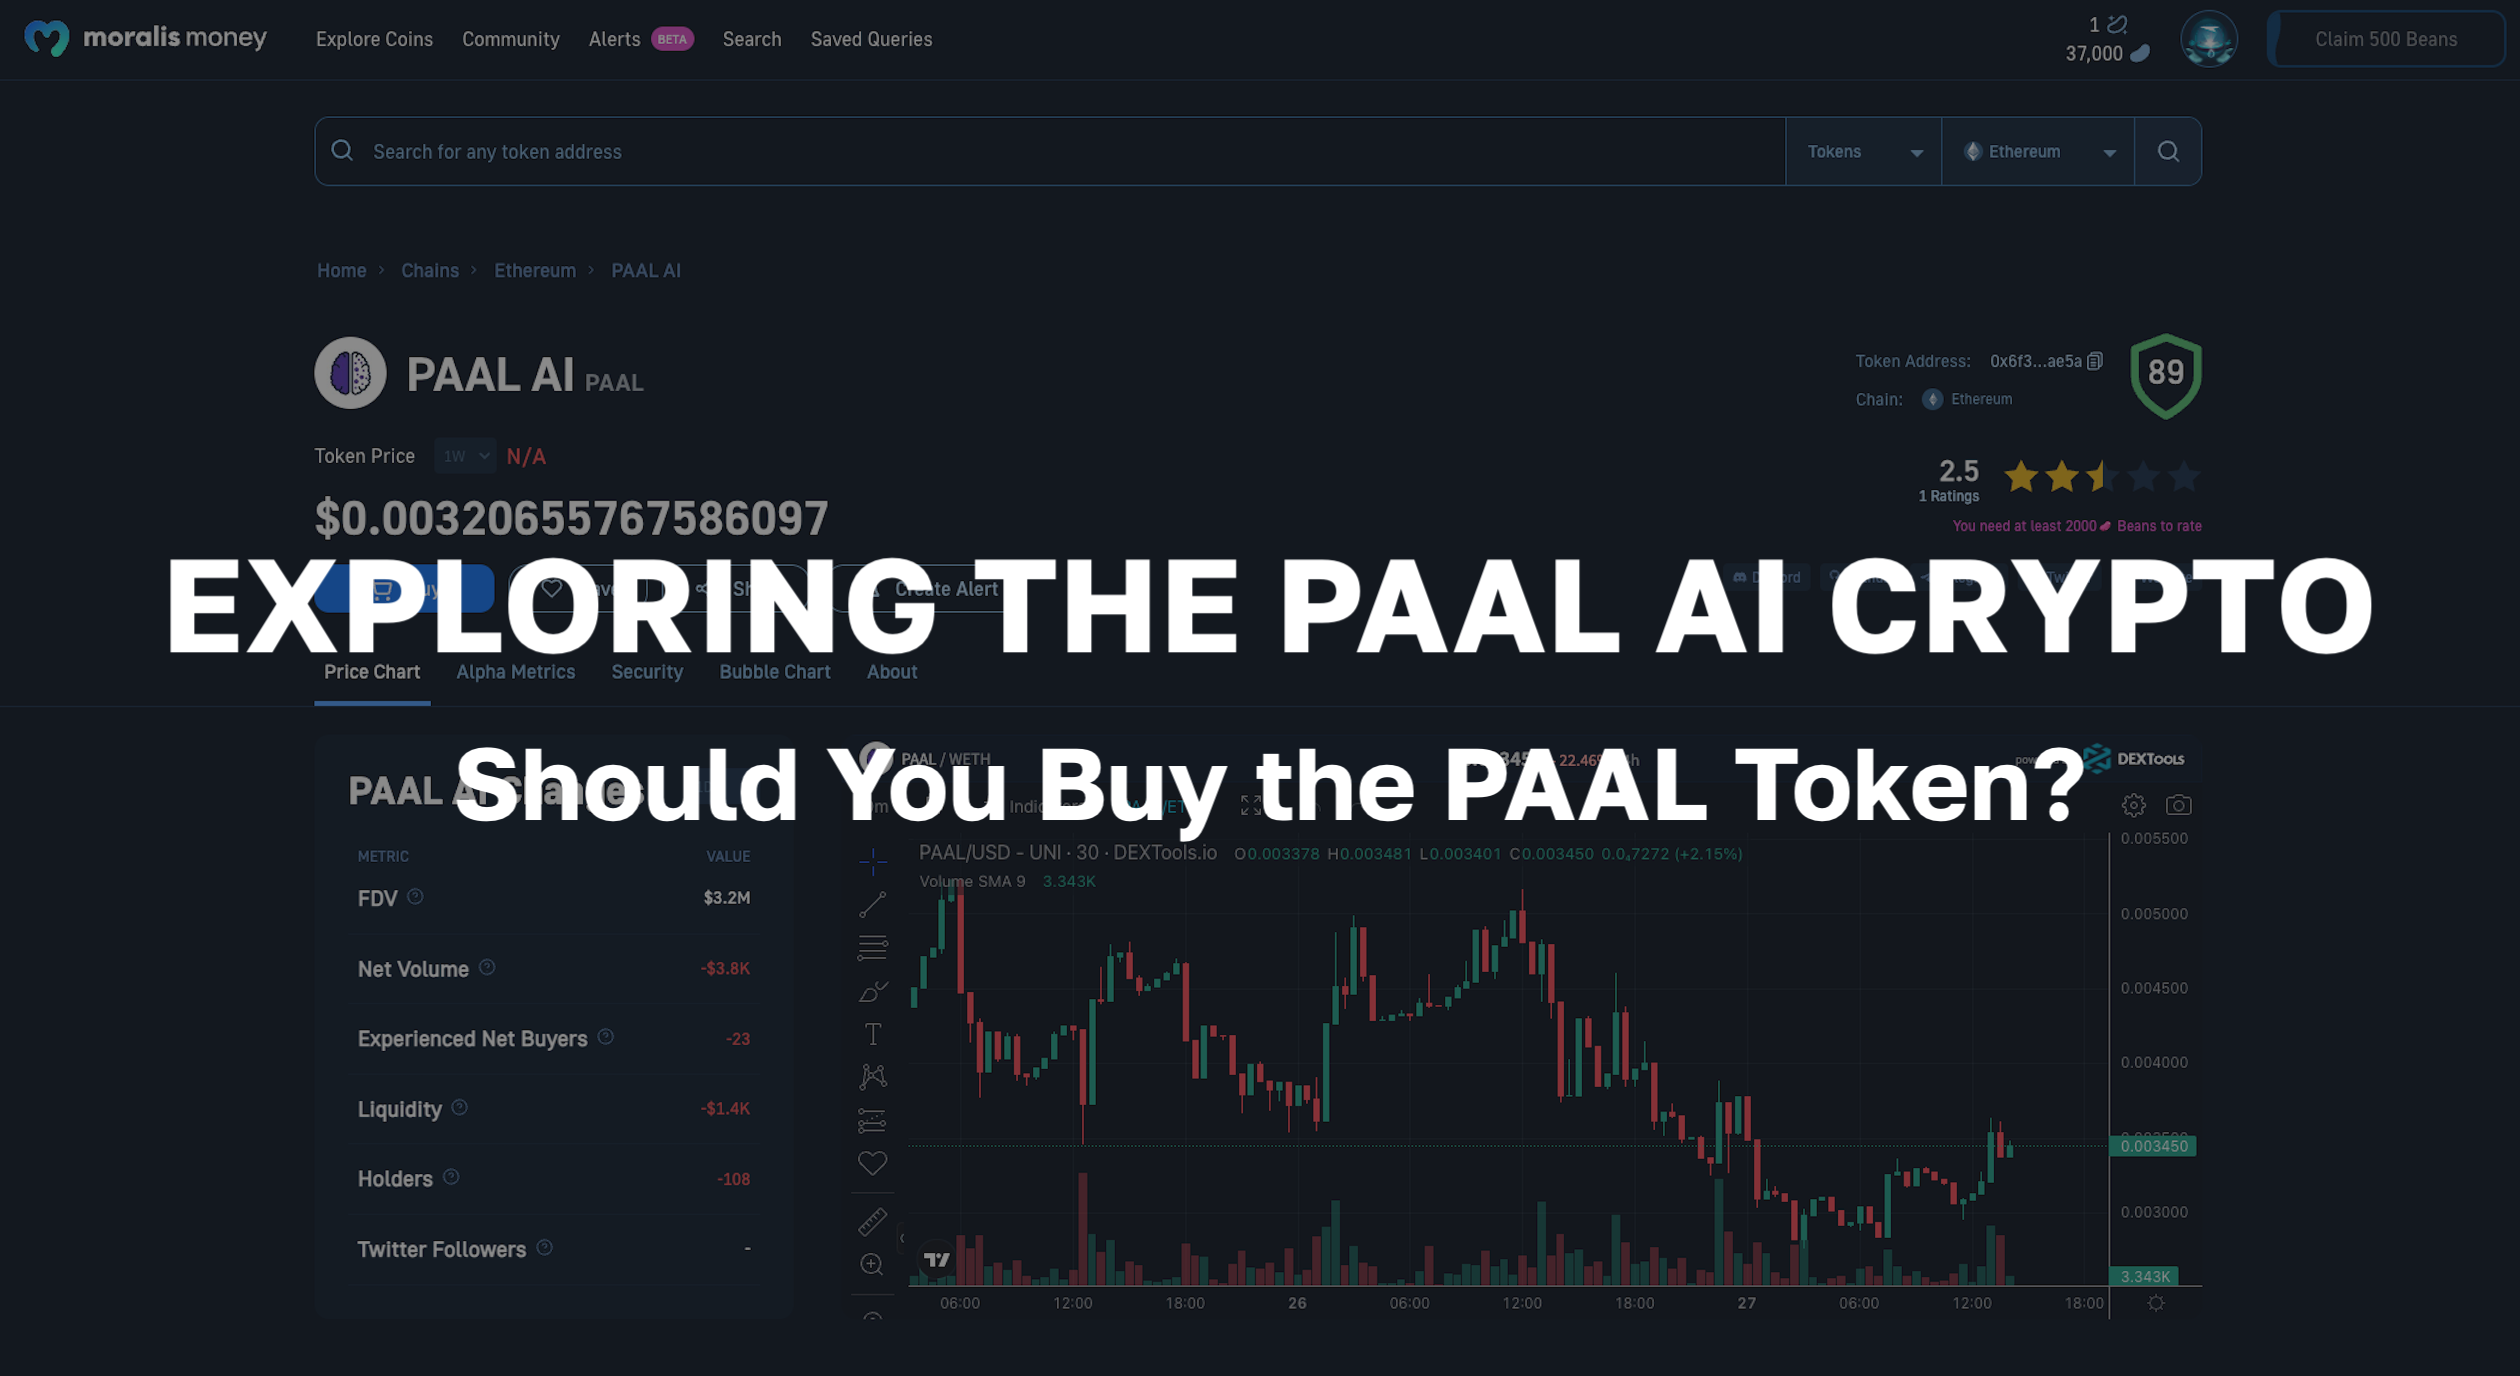 Exploring the PAAL AI Crypto - Should You Buy the PAAL Token?